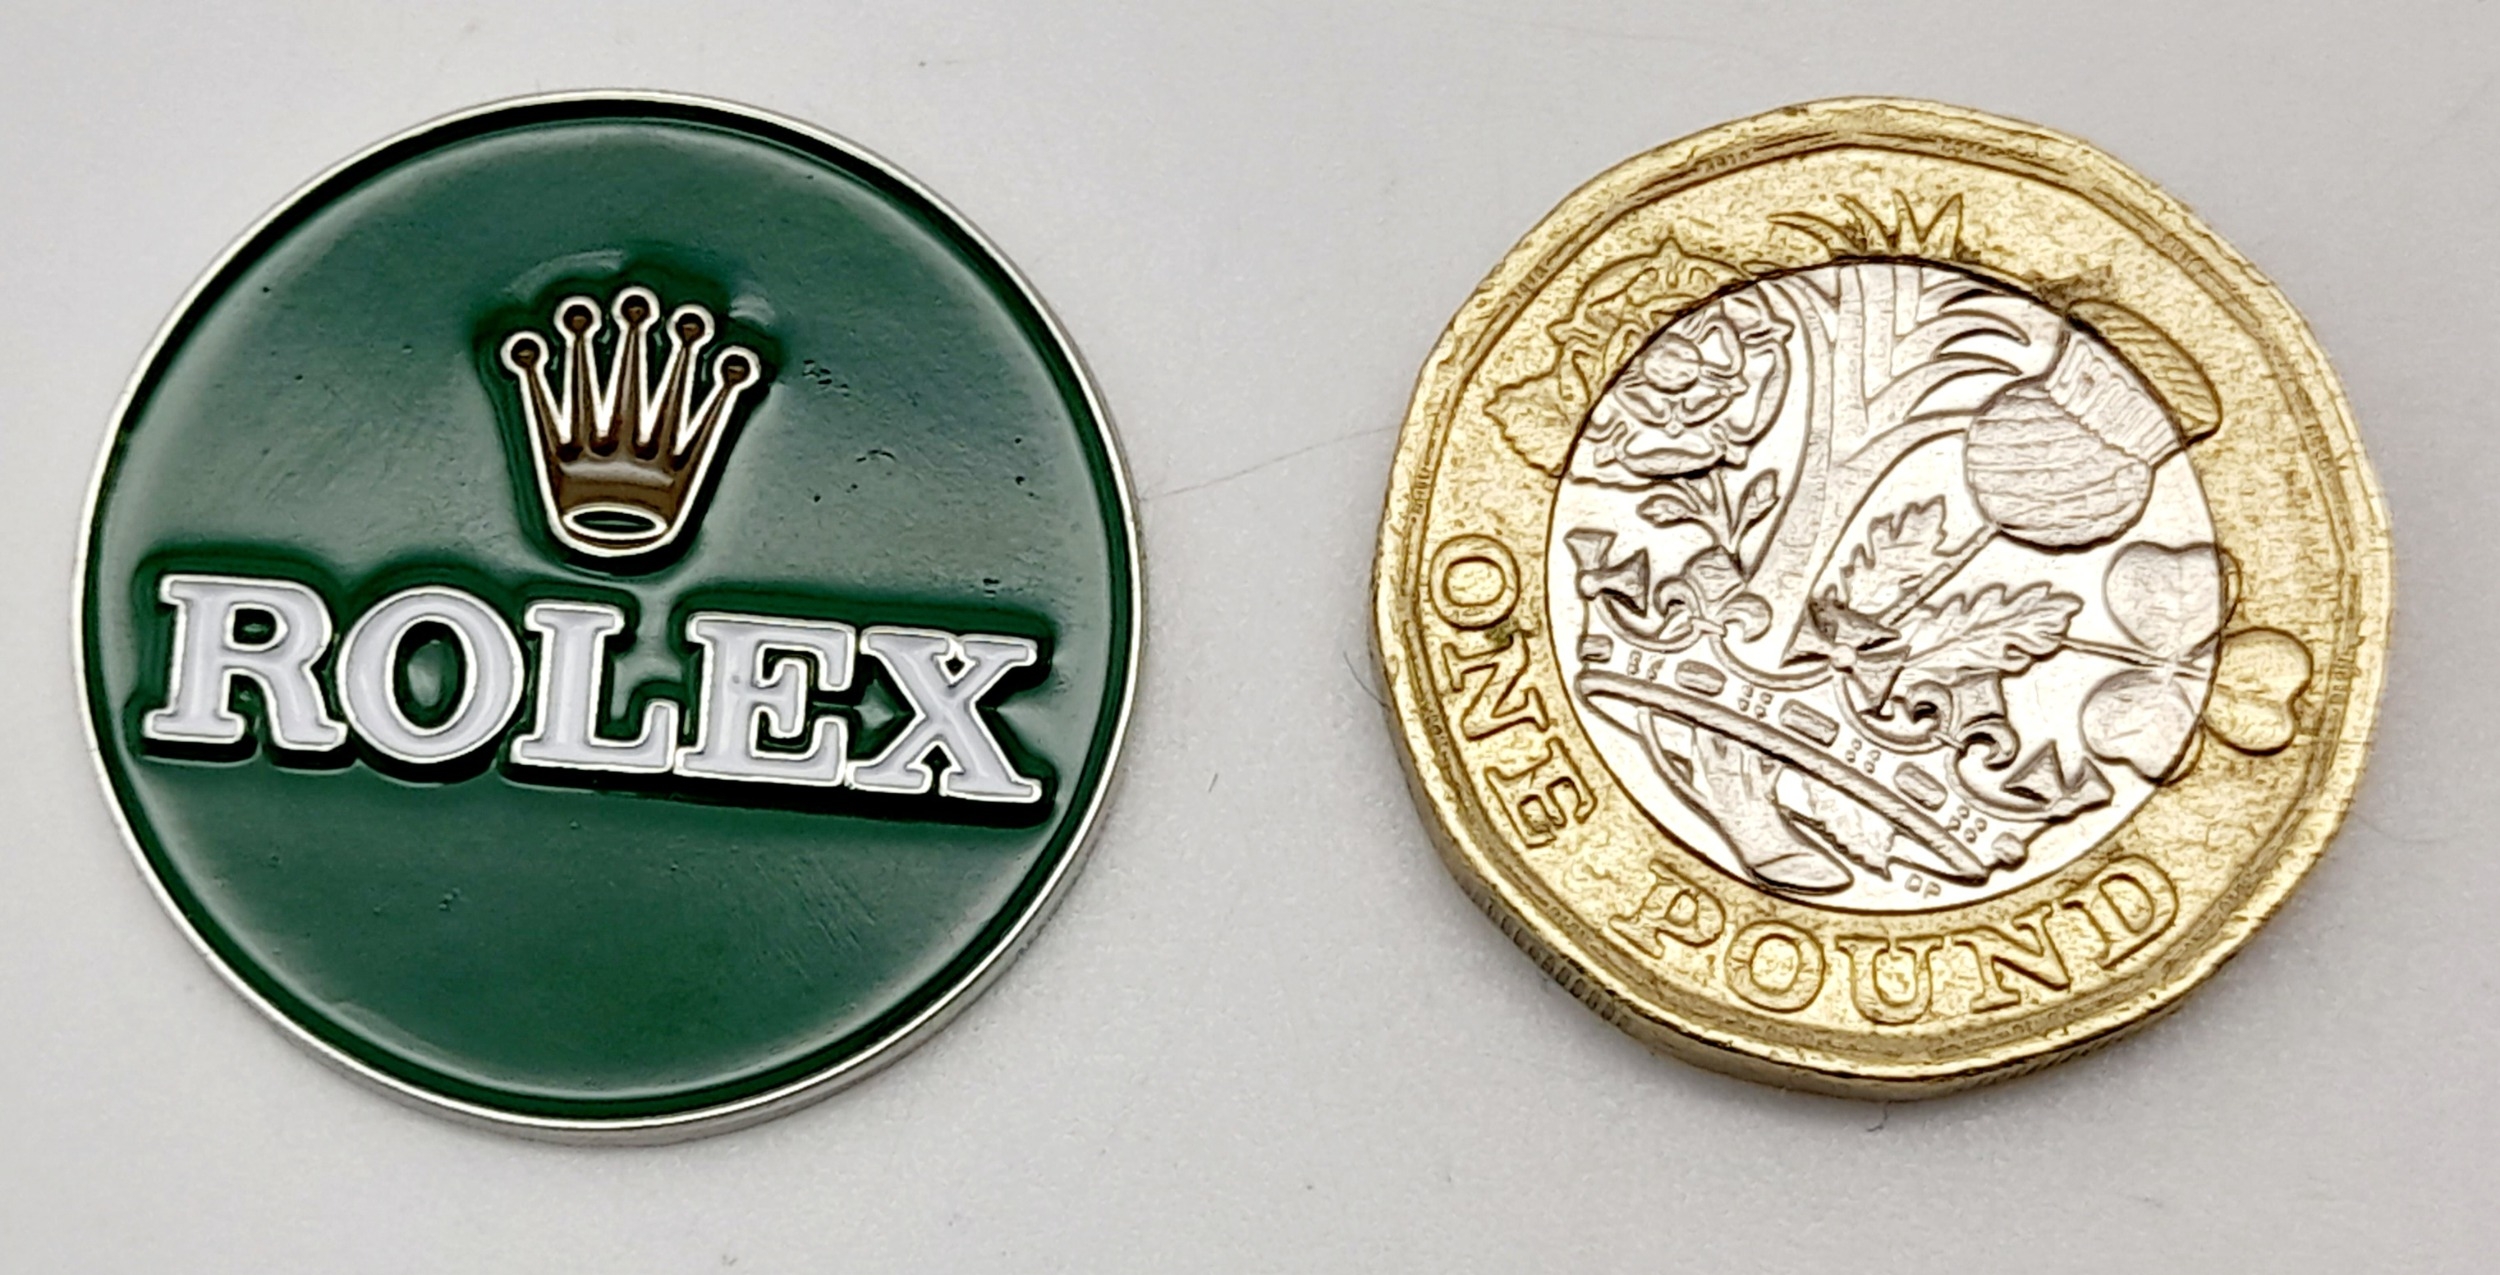 A Rolex Branded Retractable 'Flick' Golf Putting Divot Repair Tool. Removable magnetic ball marker - - Image 4 of 4